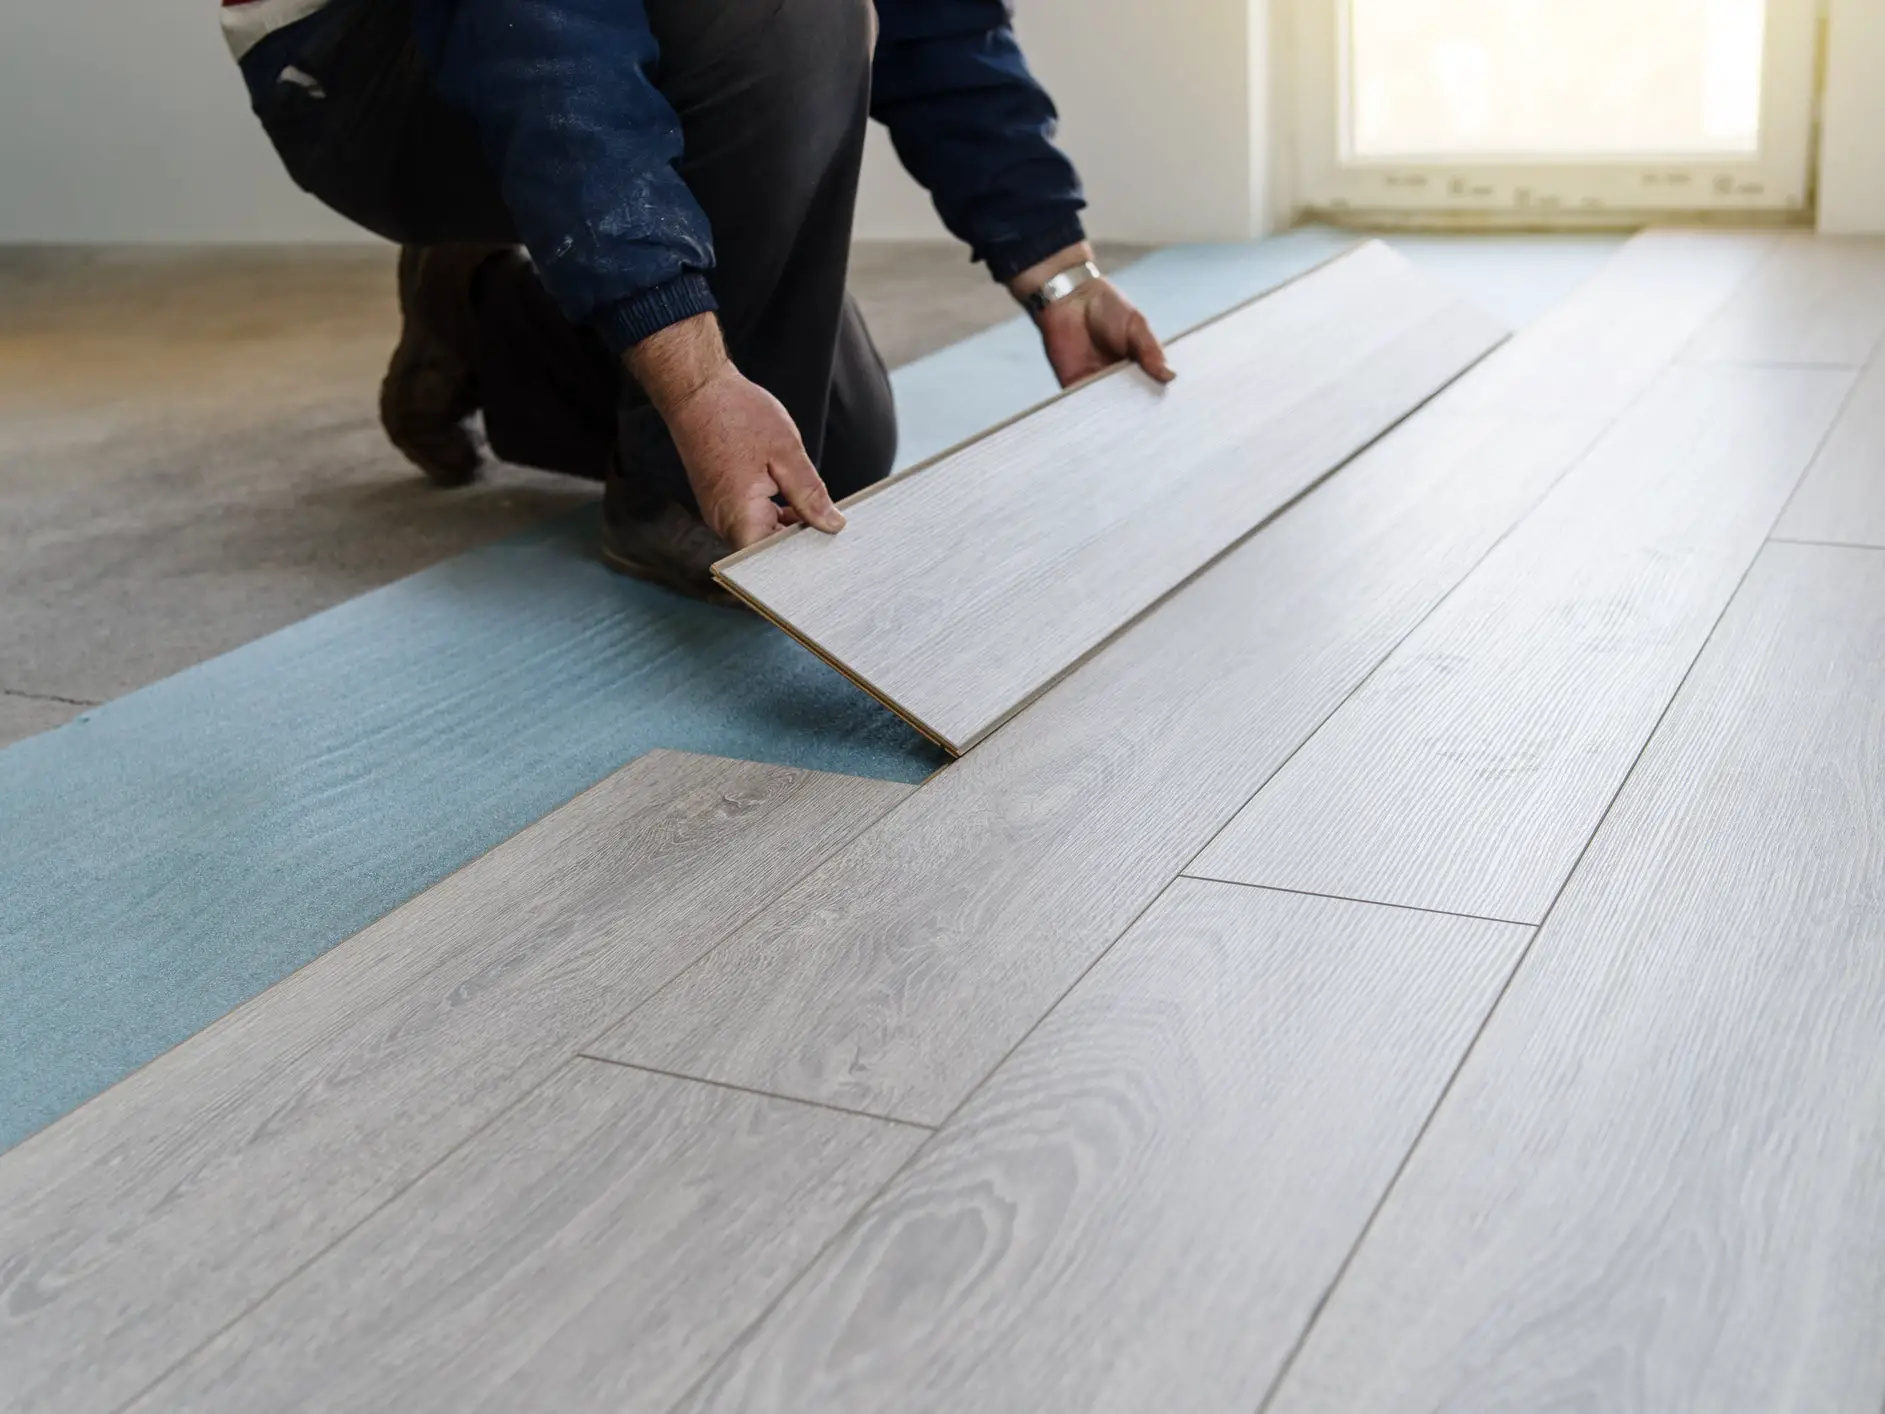 How To Install Temporary Flooring Over, Can You Put Laminate Flooring Over Top Of Carpet